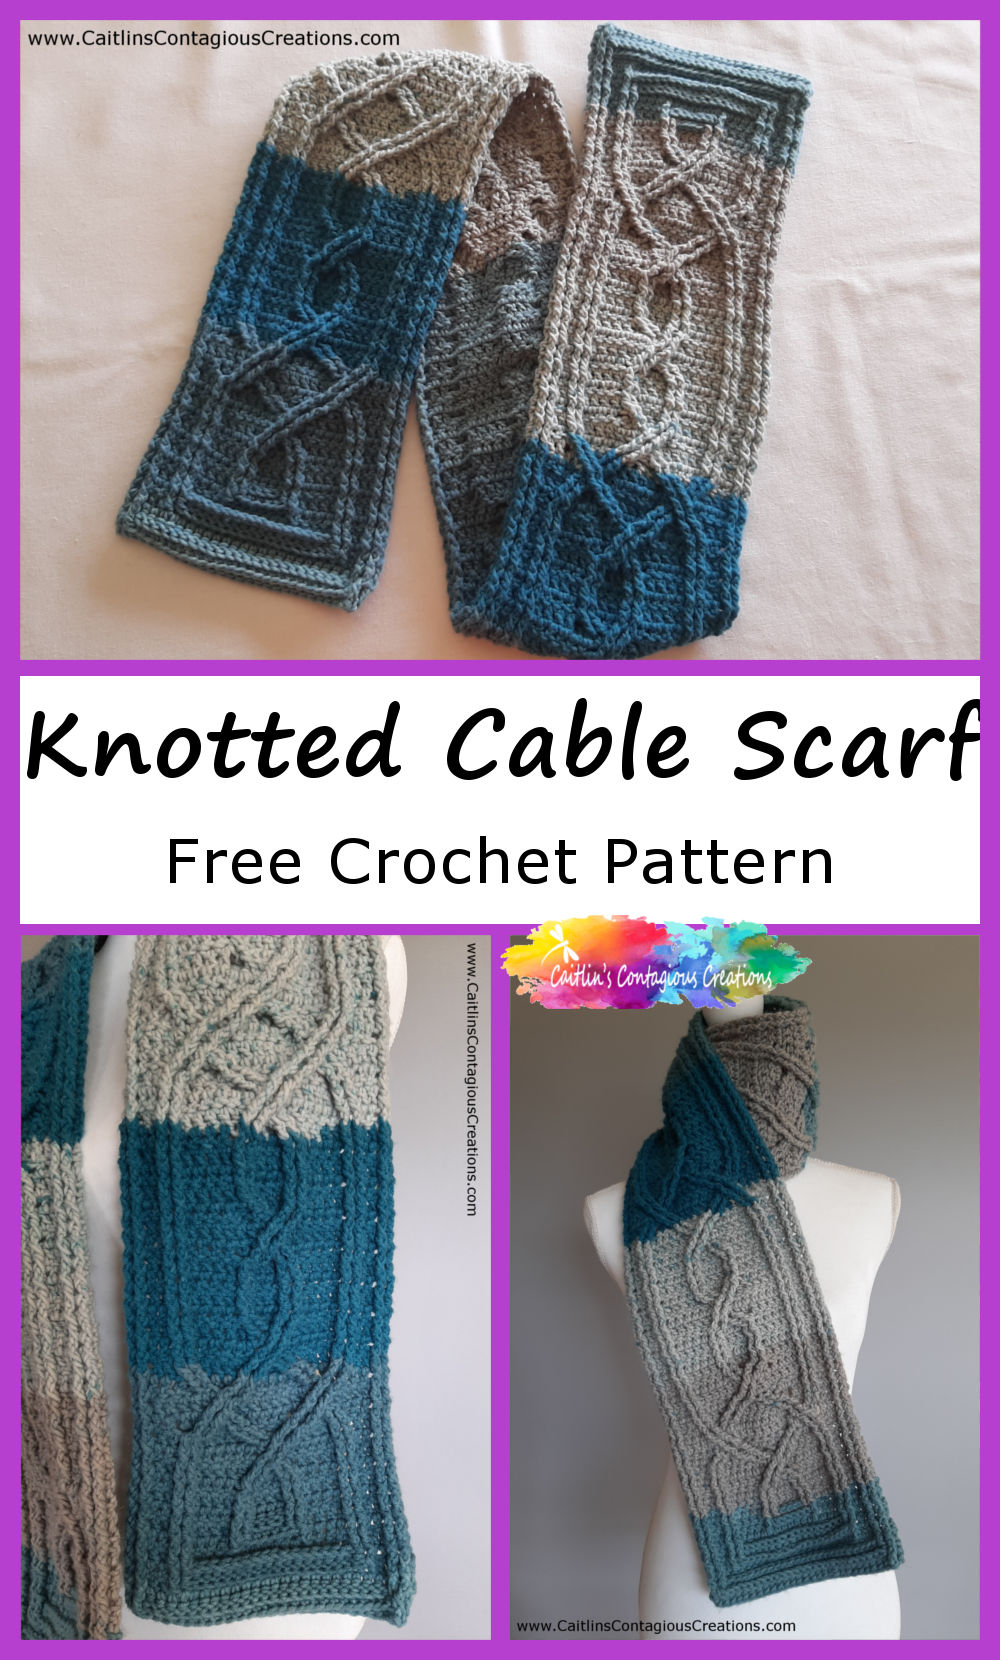 completed knotted cable scarf displayed on table and on mannequin  with text overlay :knotted Cable Scarf Free Crochet Pattern"